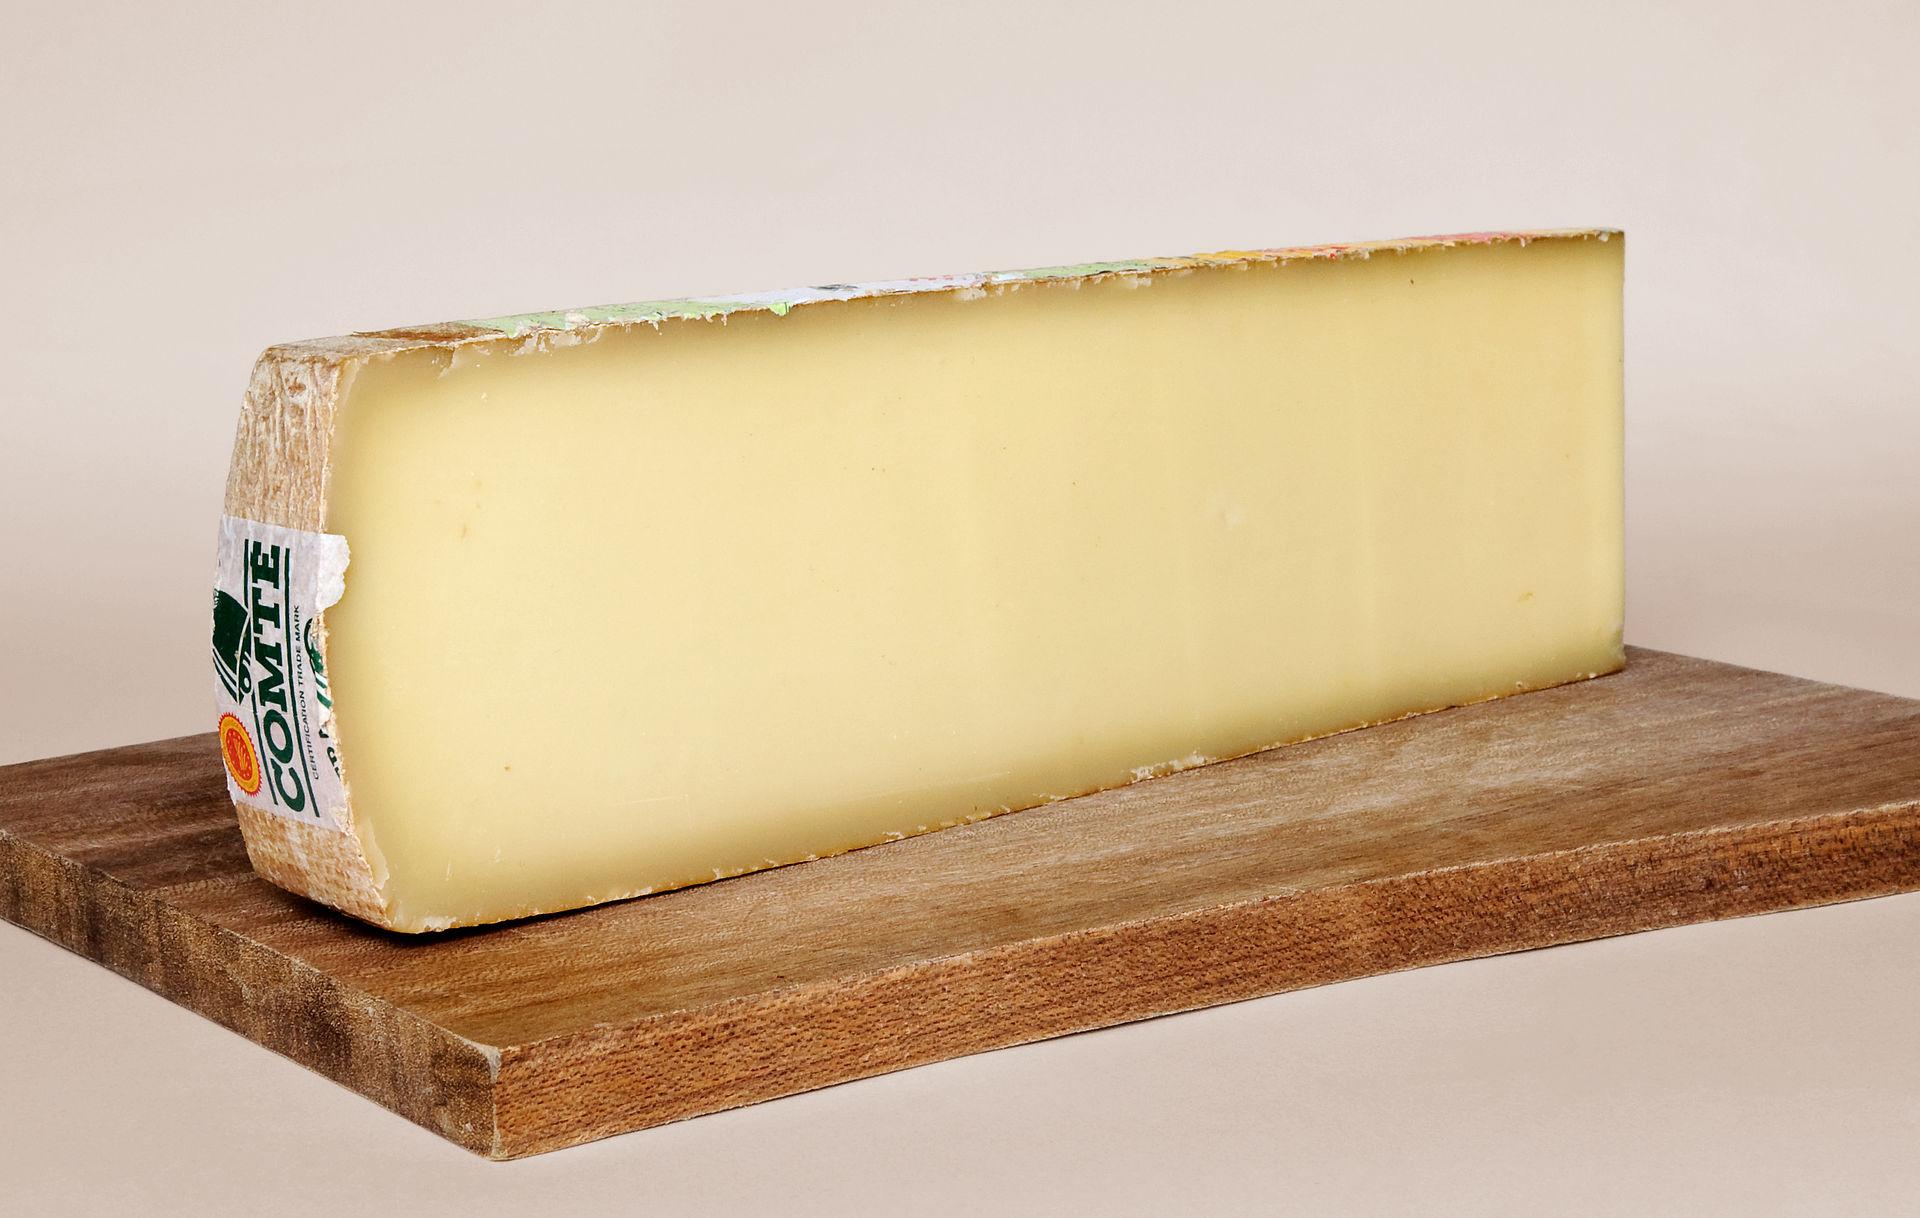 A slab of Comté, a French raw cow's milk cheese, labelled Protected Designation of Origin (PDO)